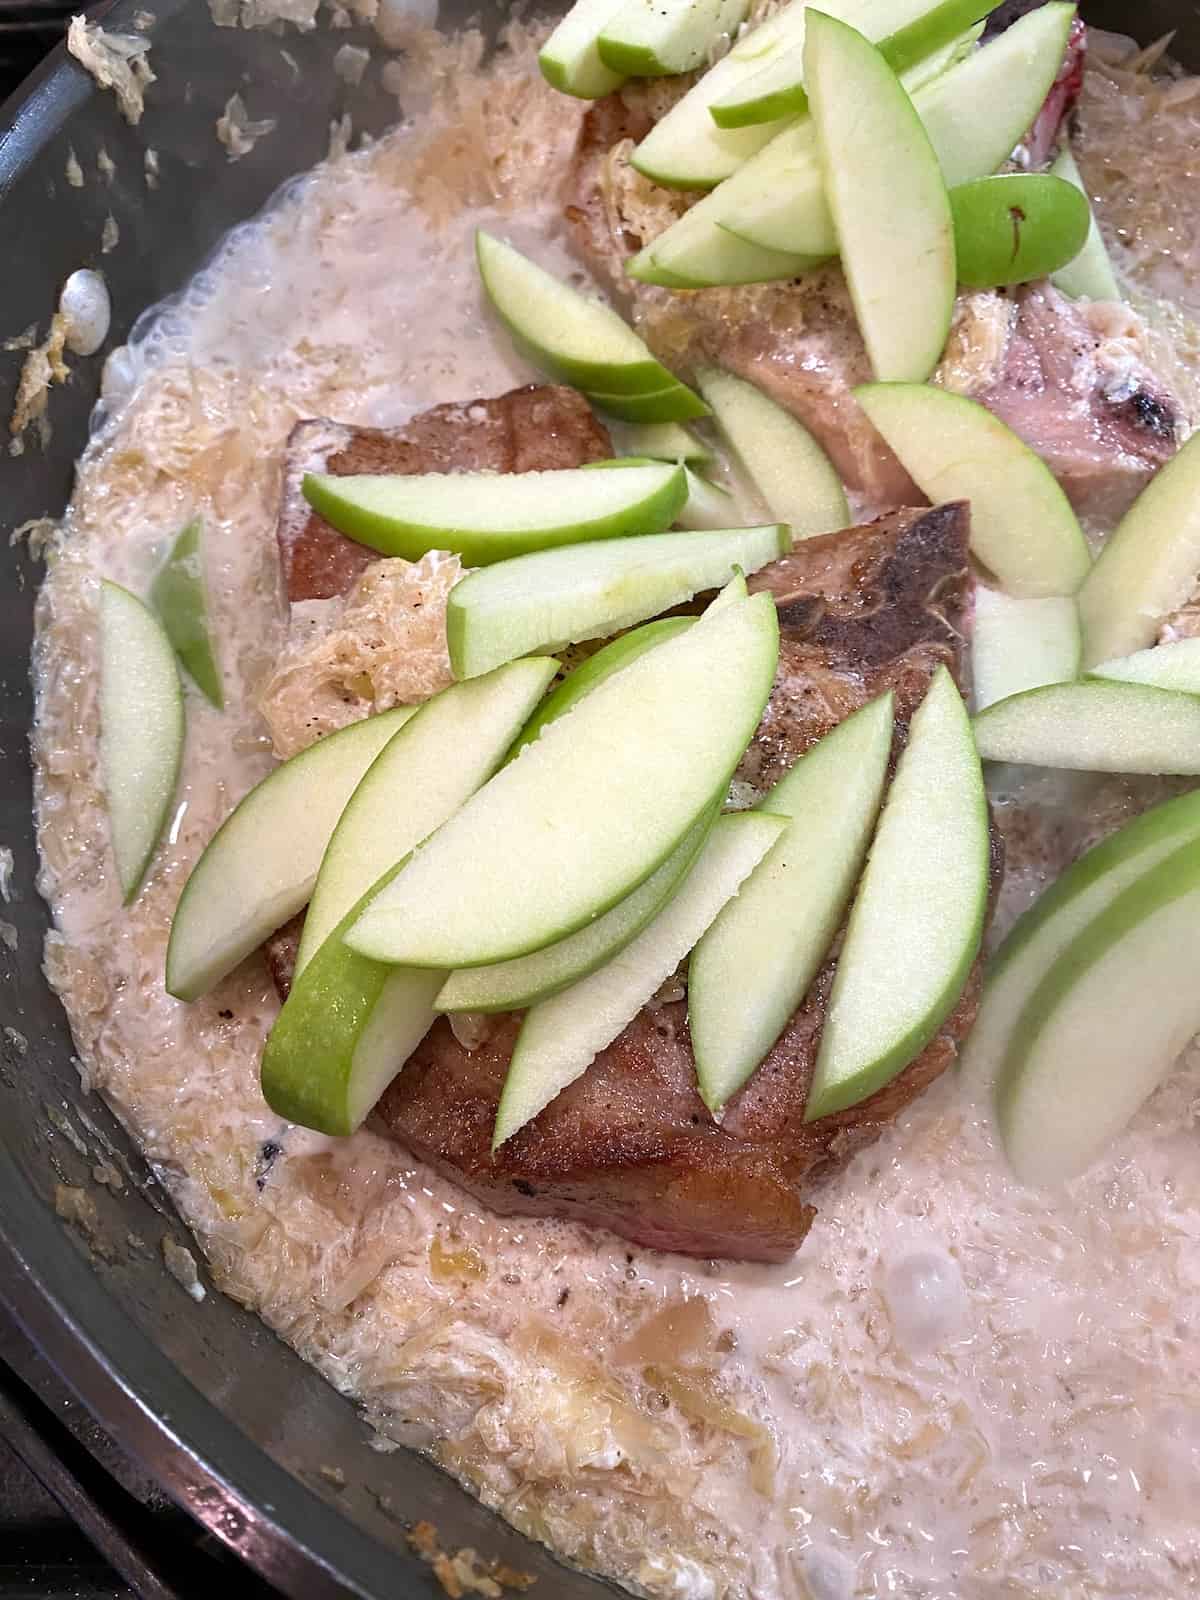 Sliced apples on top of pork chops in a skillet on the stove.